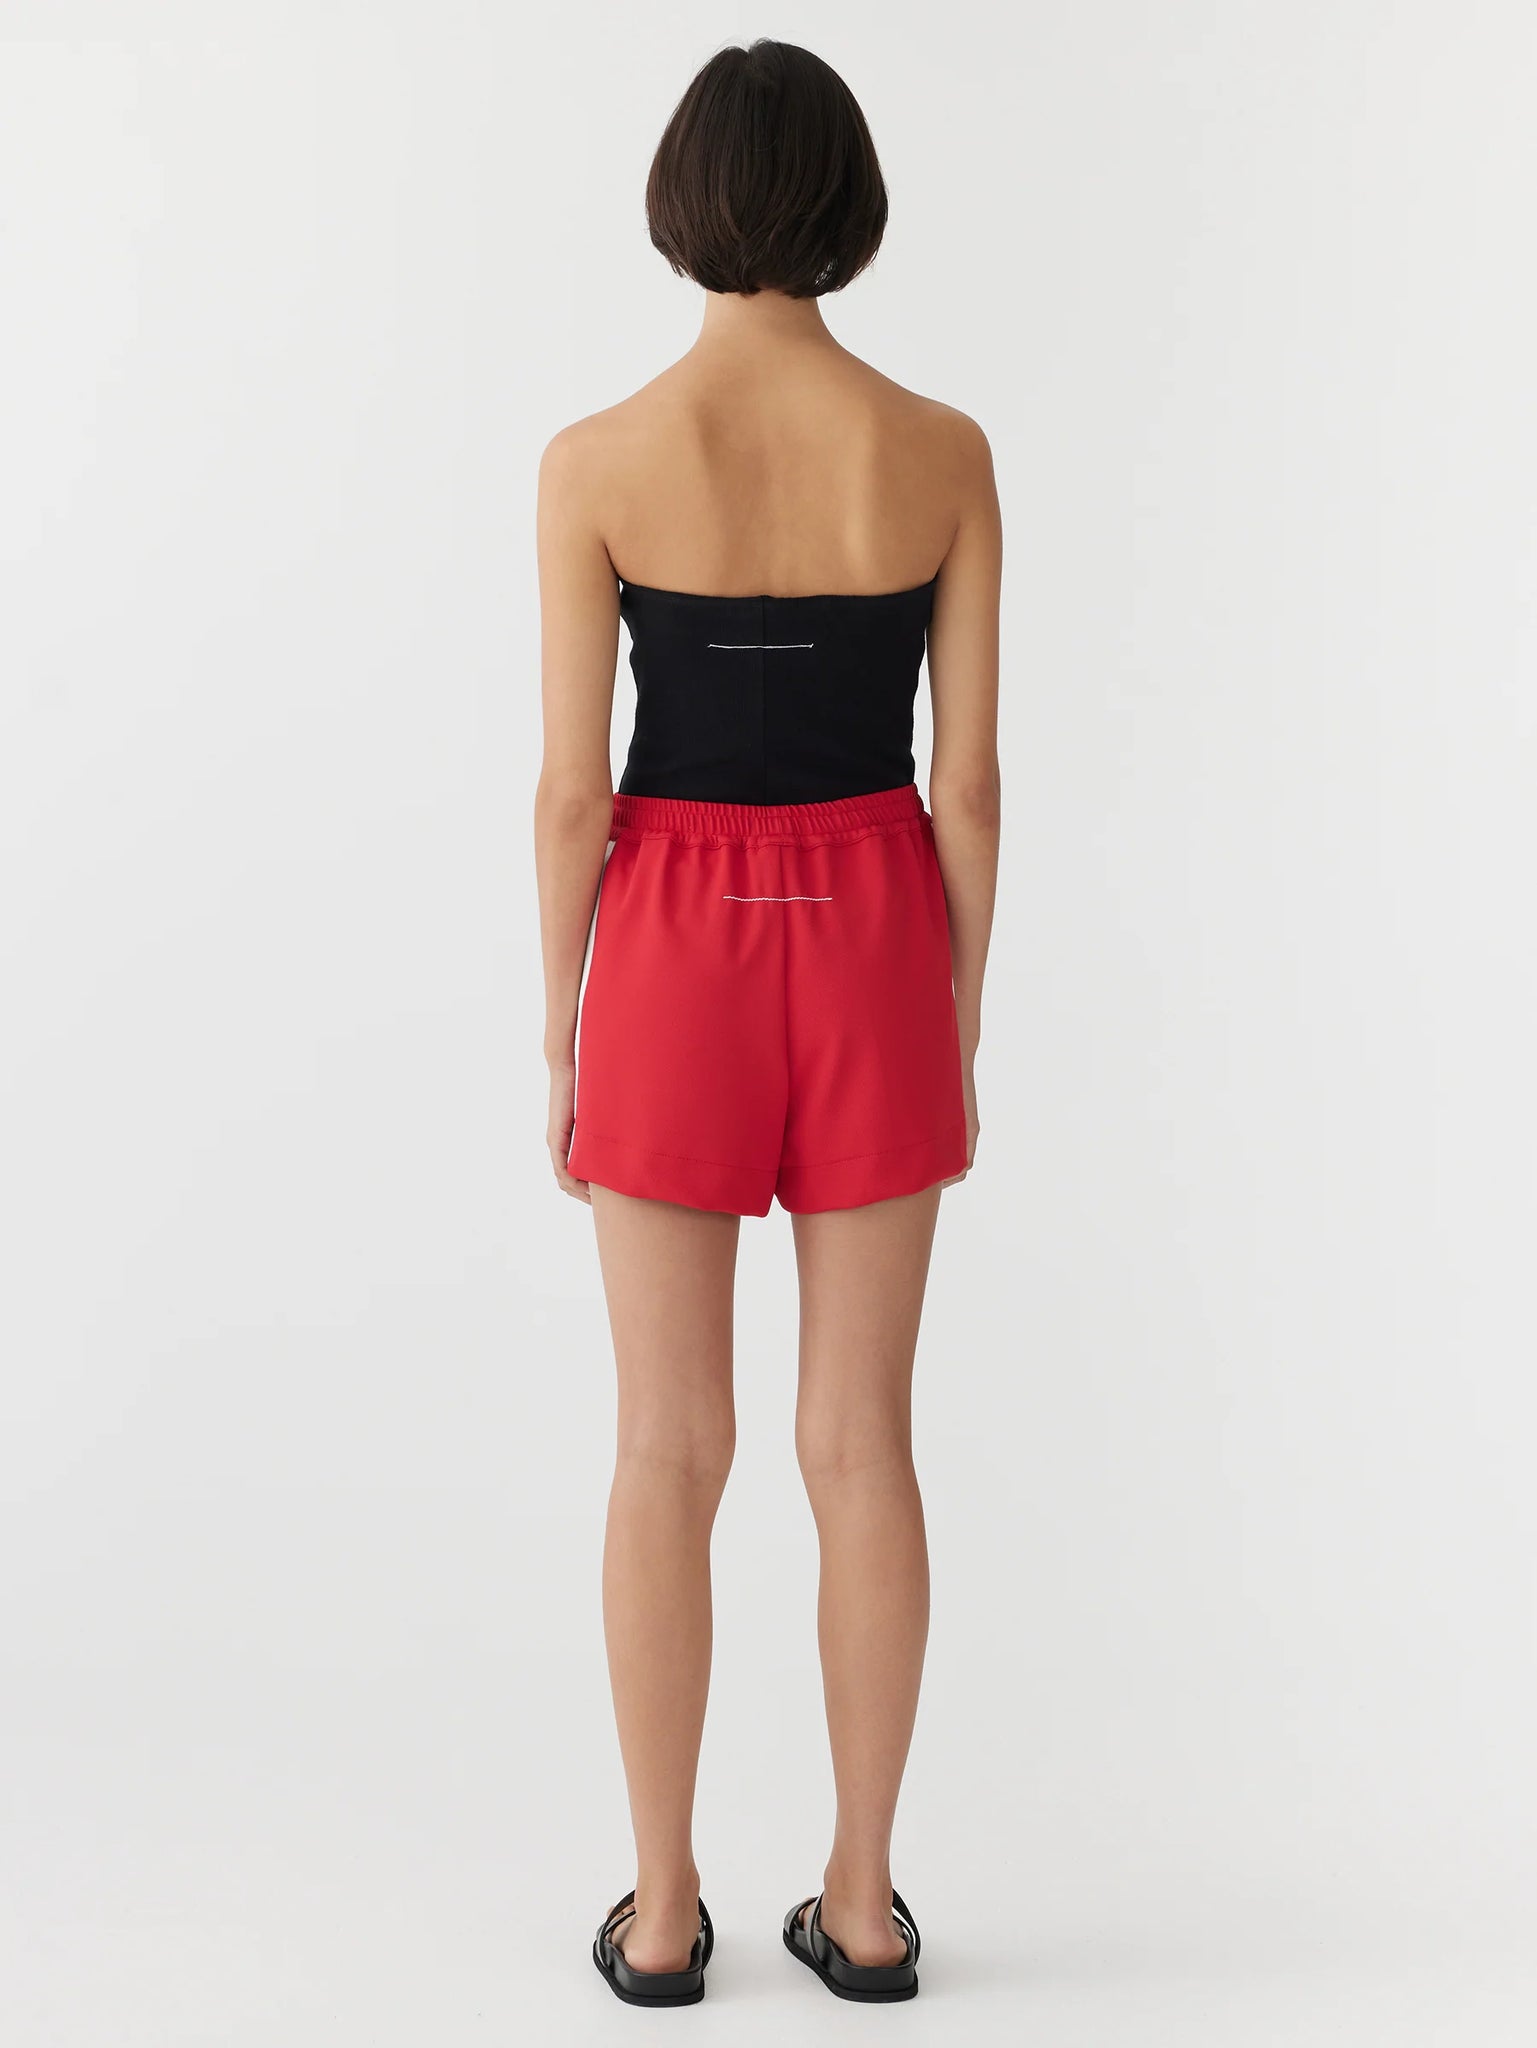 TWILL SIDE DETAIL SHORT - RED/WHITE - BASSIKE